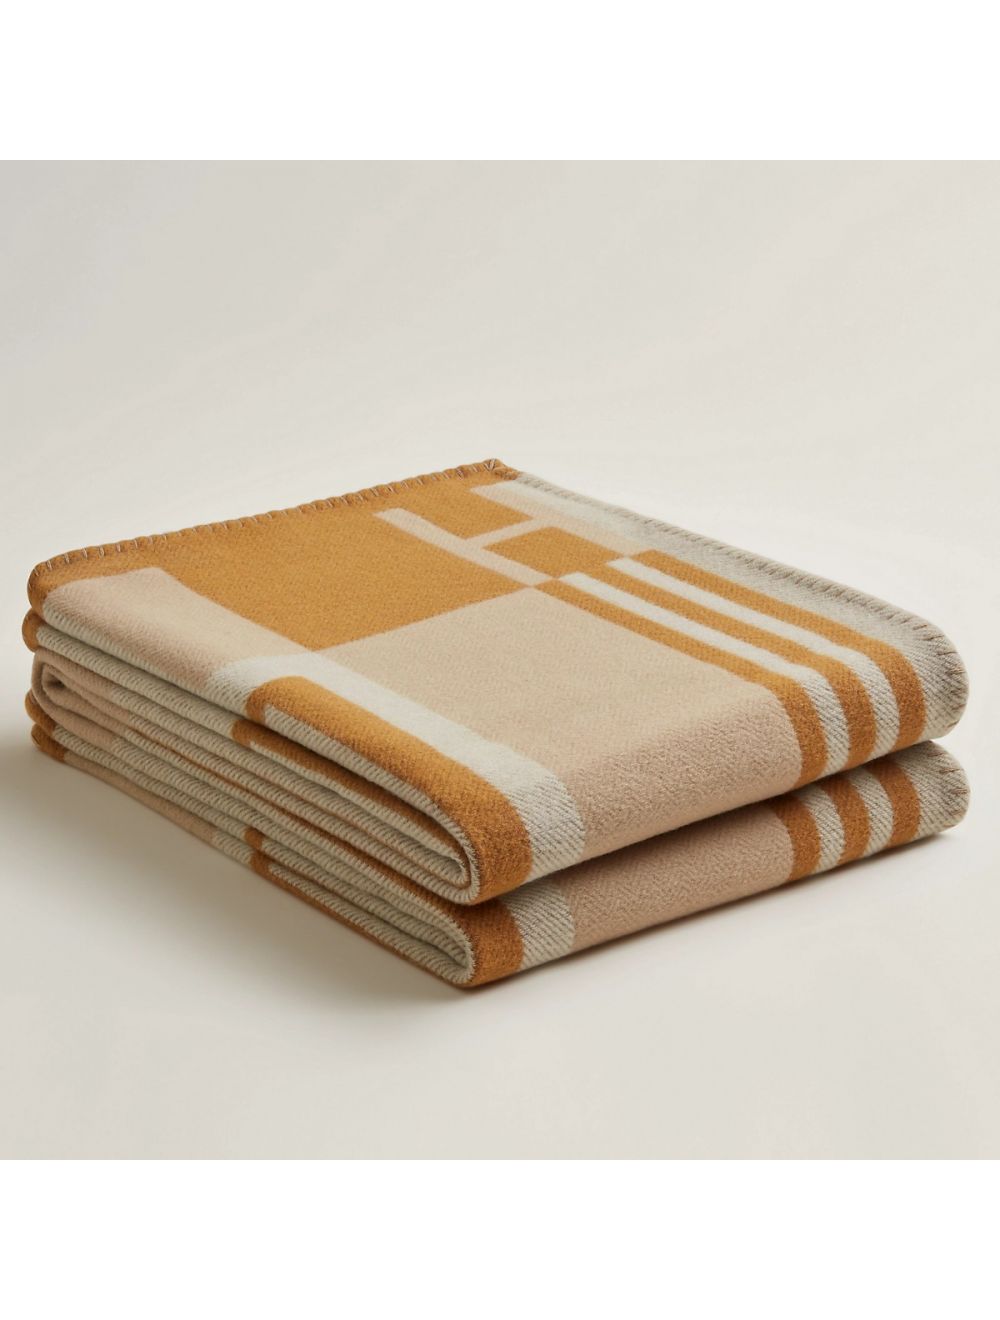 Replica Hermes Ithaque Blanket in Beige Wool and Cashmere